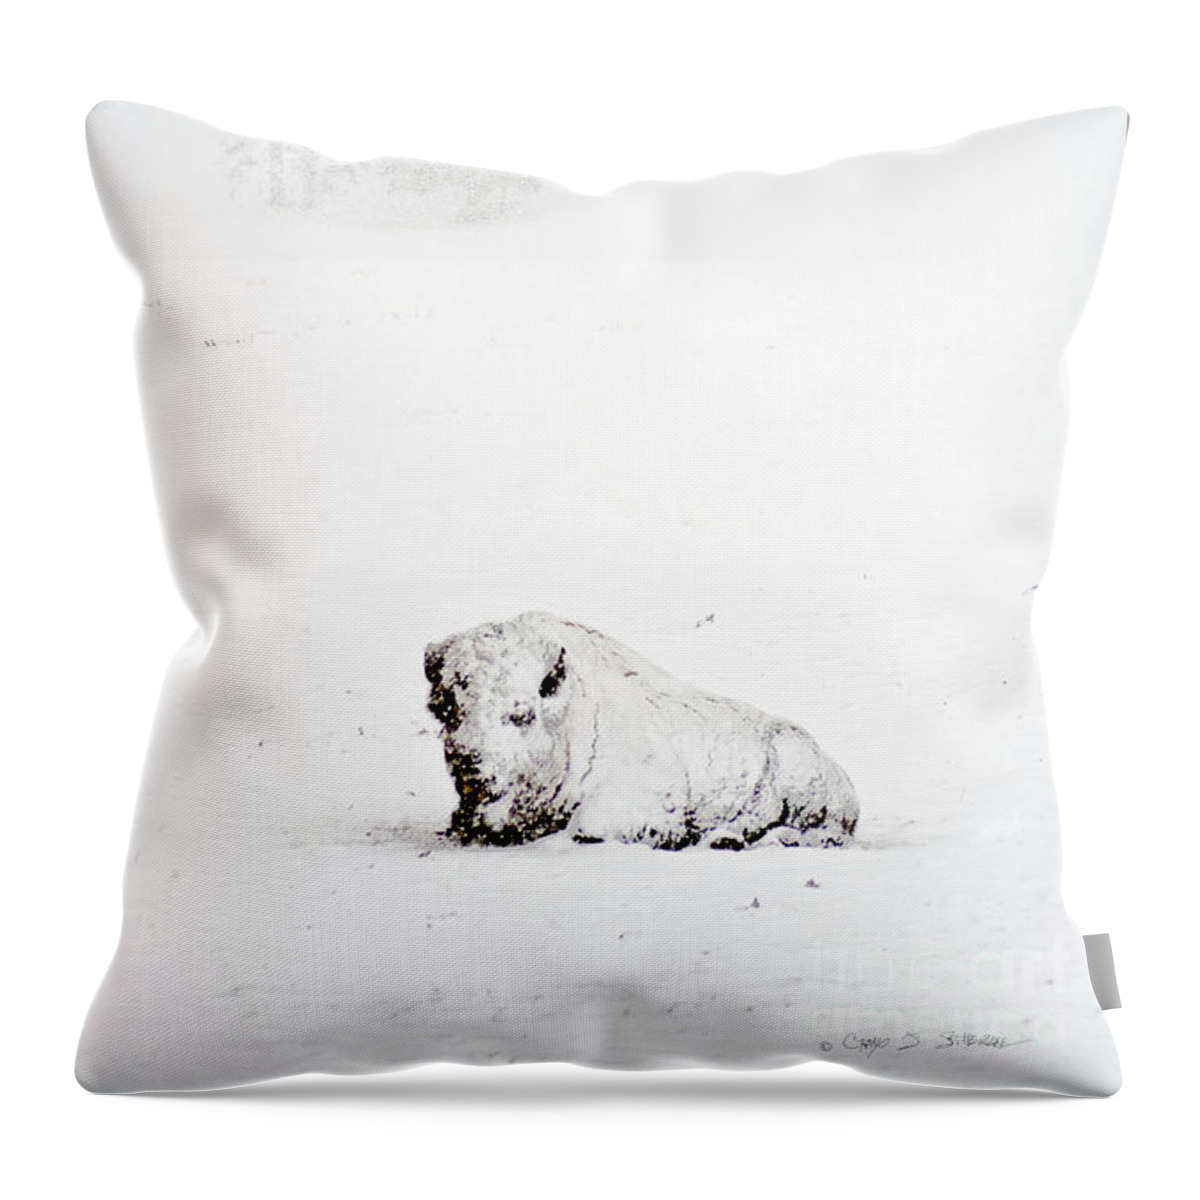 Landscape Throw Pillow featuring the photograph Blizzard Winter Buffalo by Craig J Satterlee